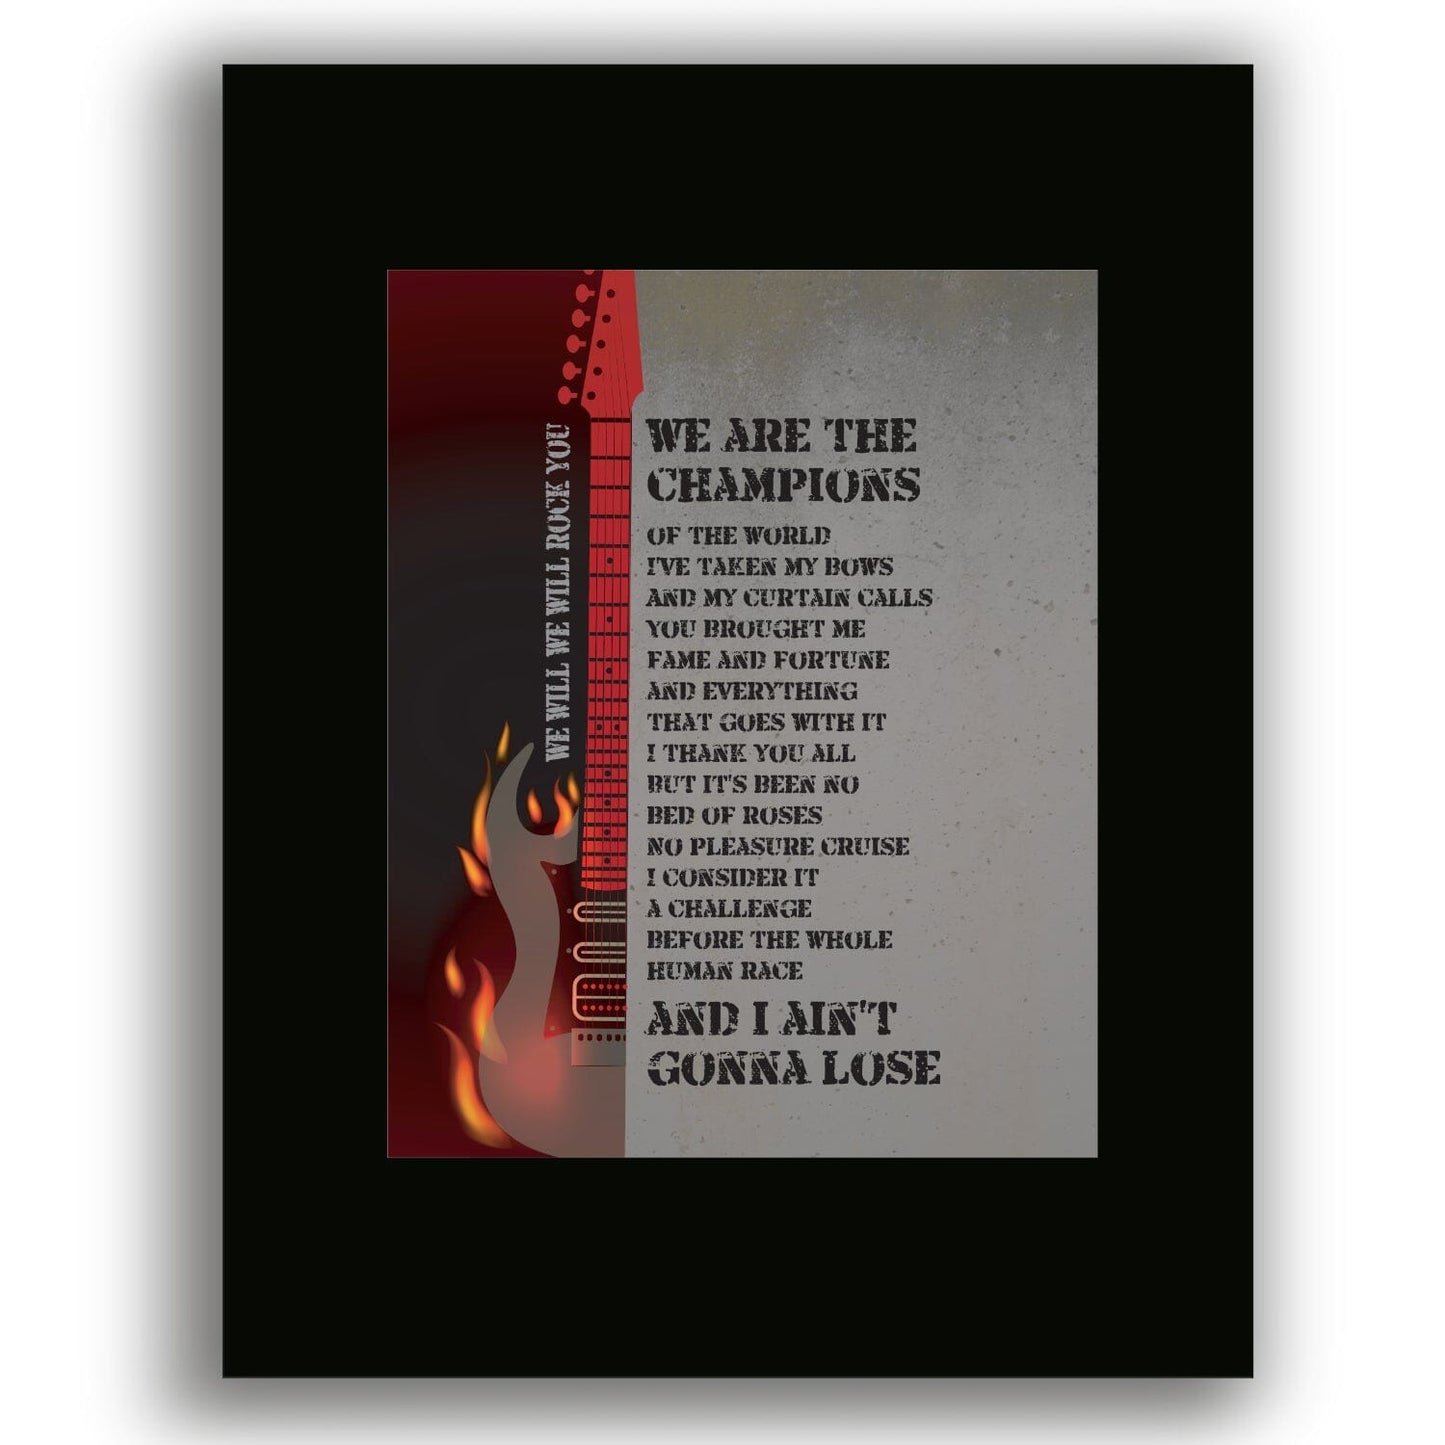 We Will Rock You, We are the Champions by Queen - Lyric Art Song Lyrics Art Song Lyrics Art 11x14 White Matted Print 